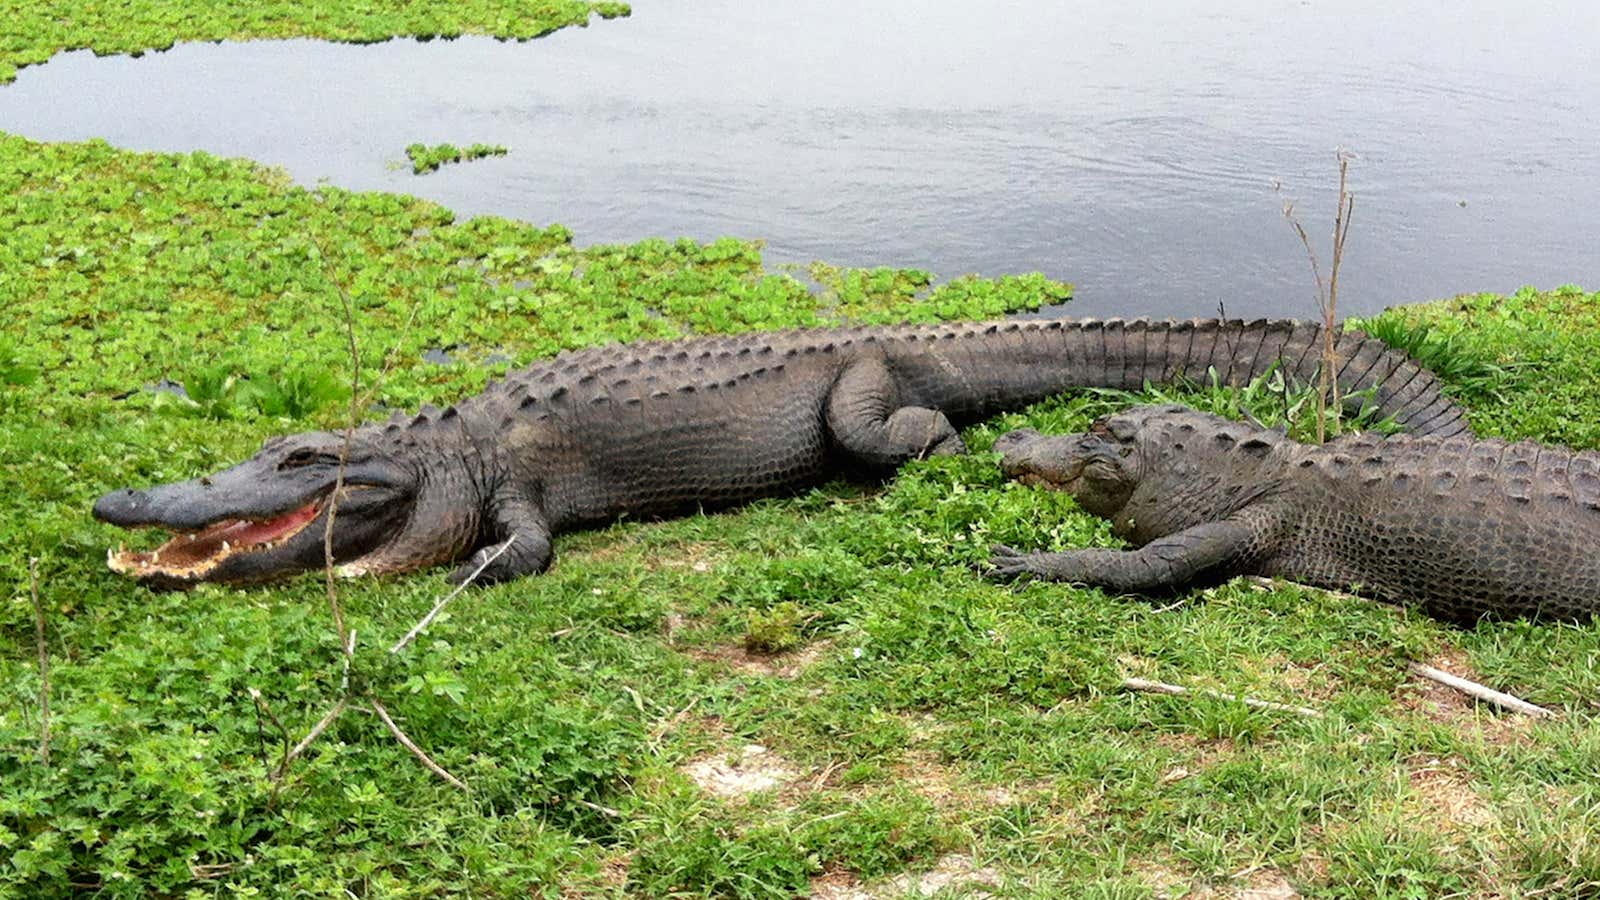 Alligators, when fed, may learn to associate people with food.